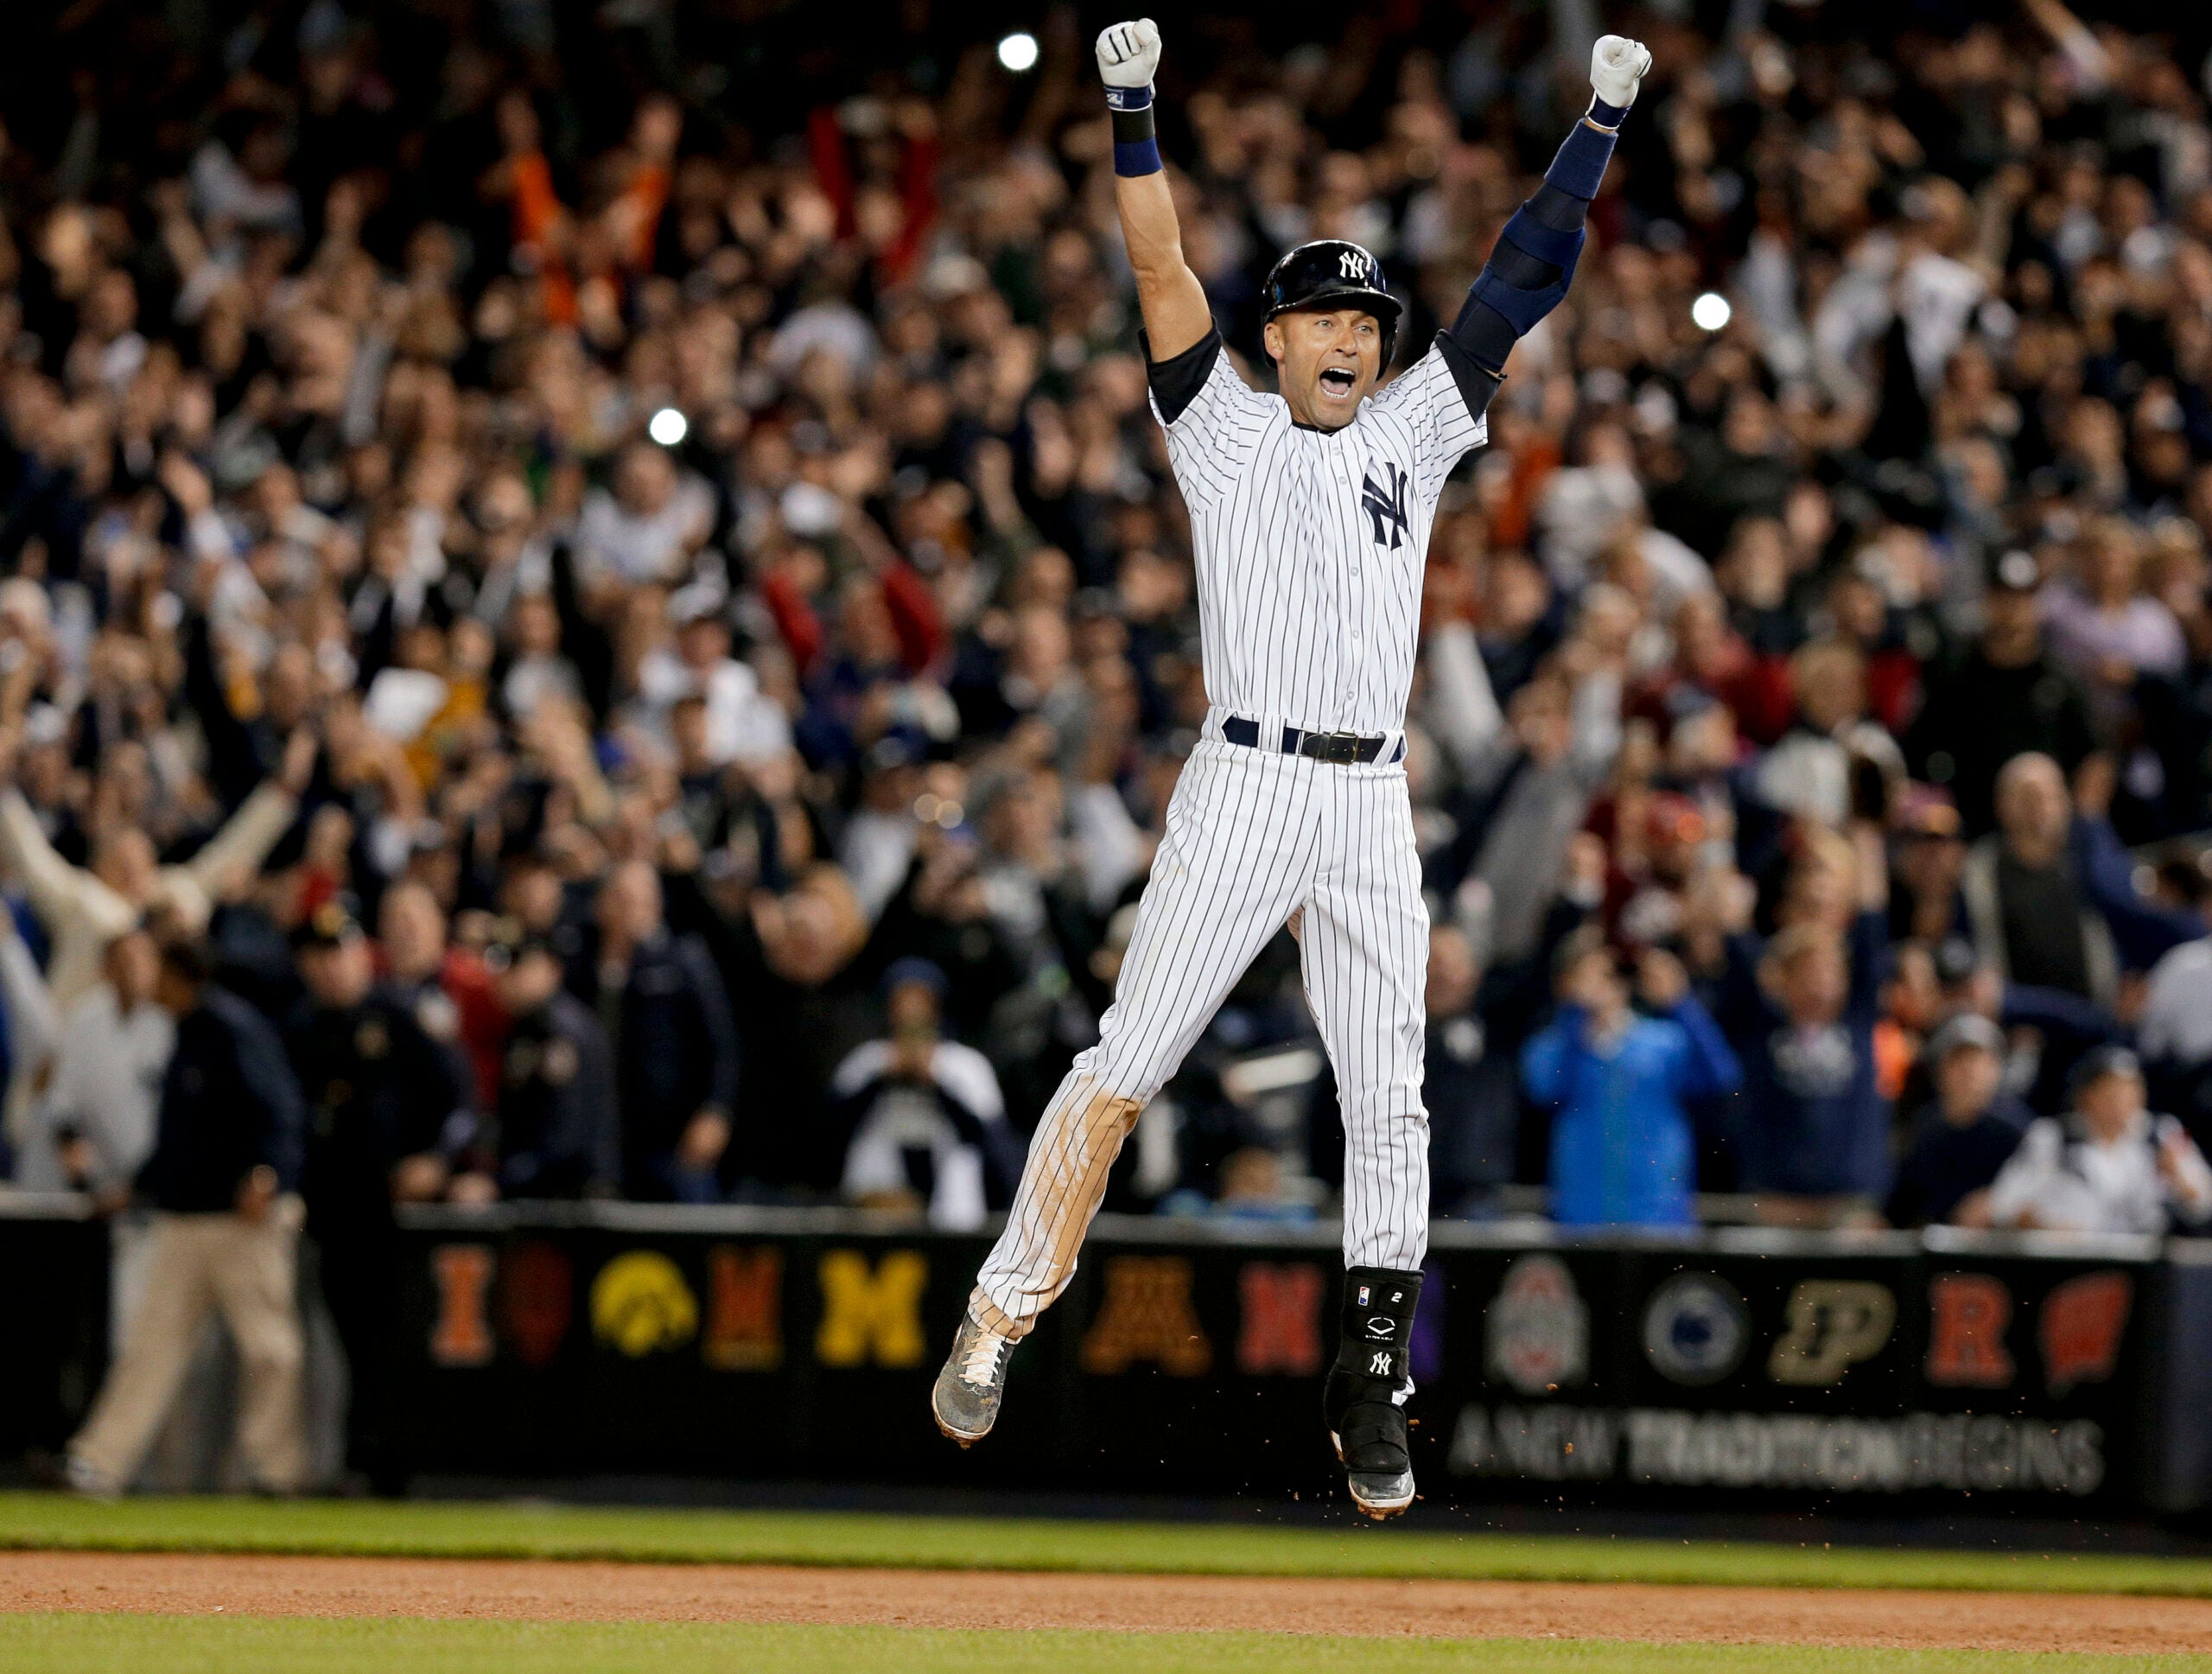 Here's my six for the Baseball Hall of Fame, including Derek Jeter